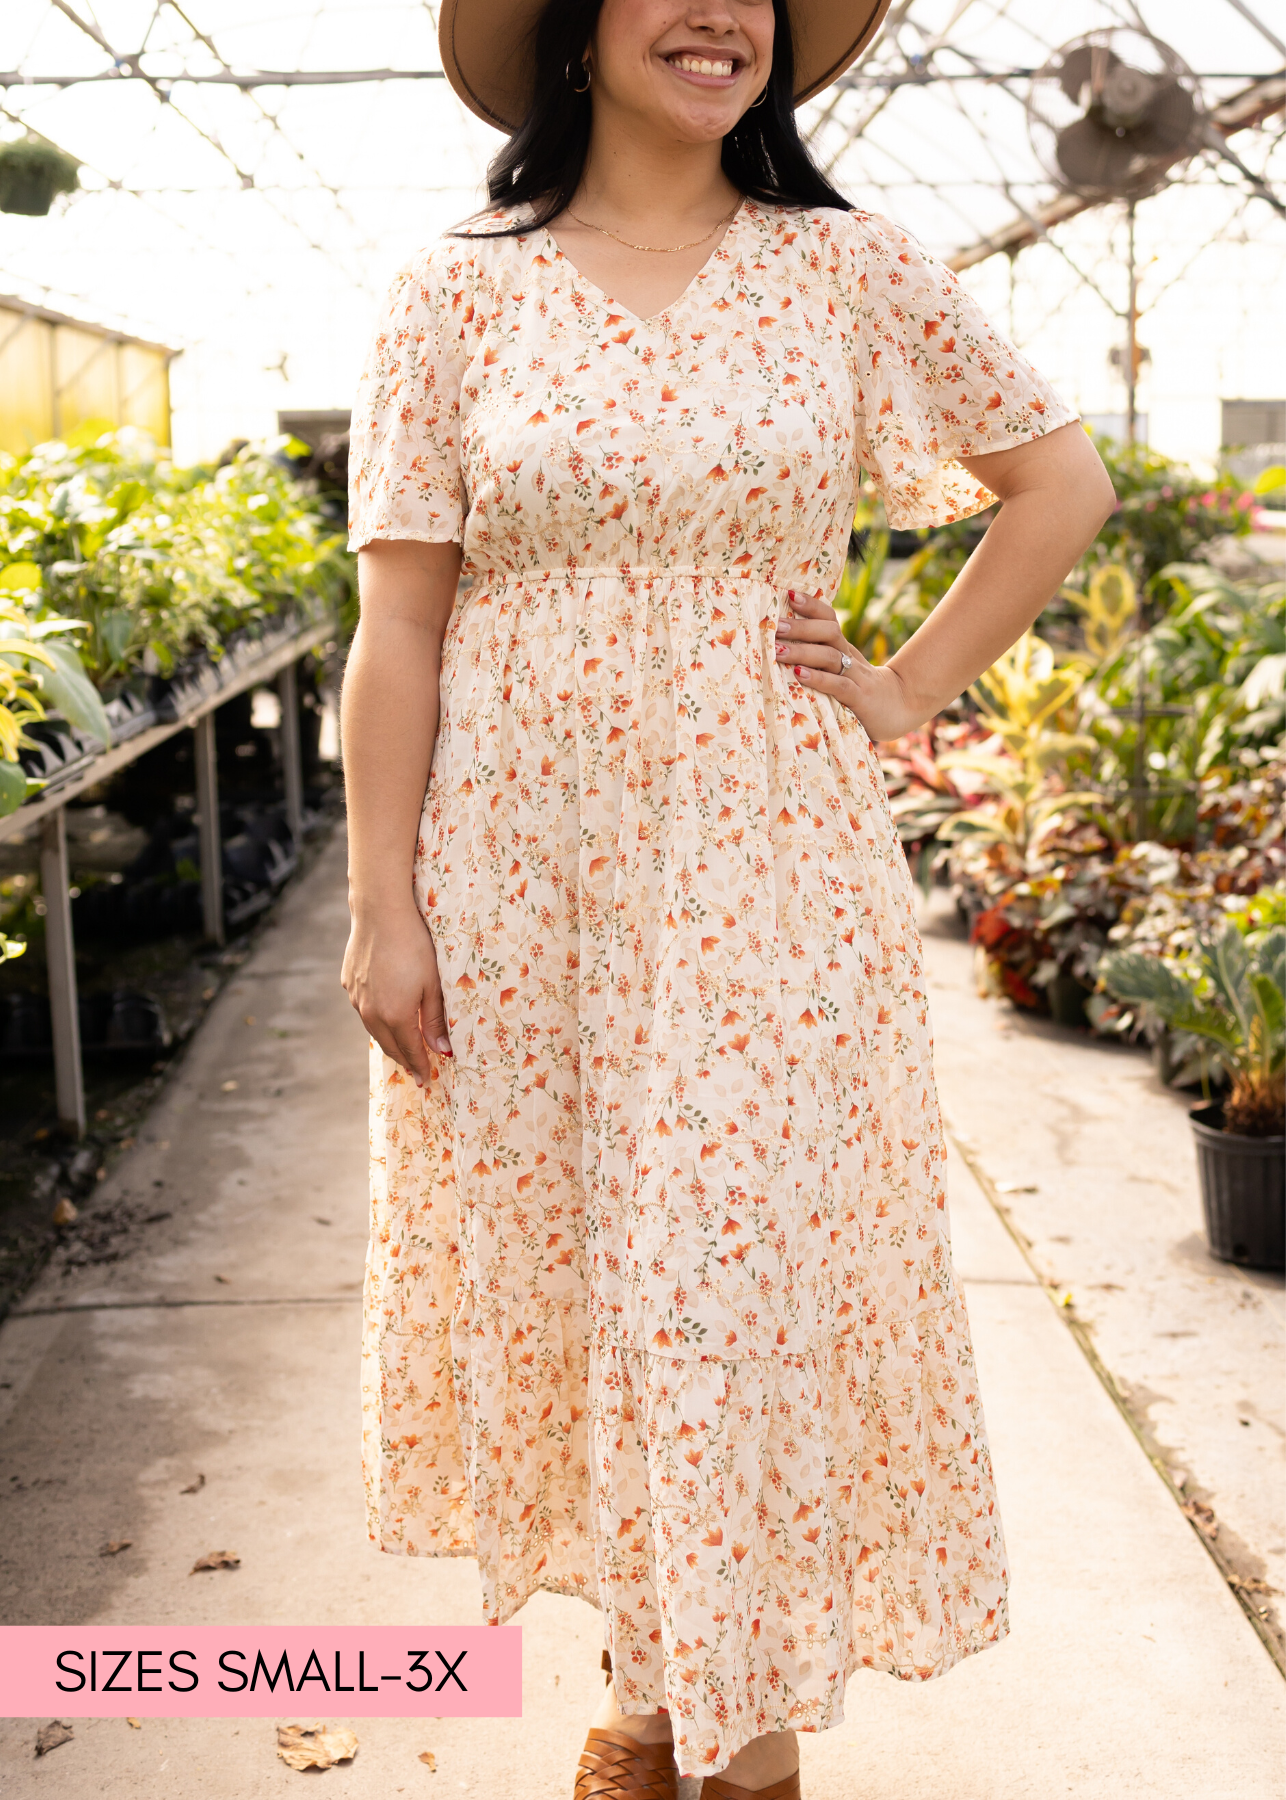 V-neck cream floral dress with short sleeves